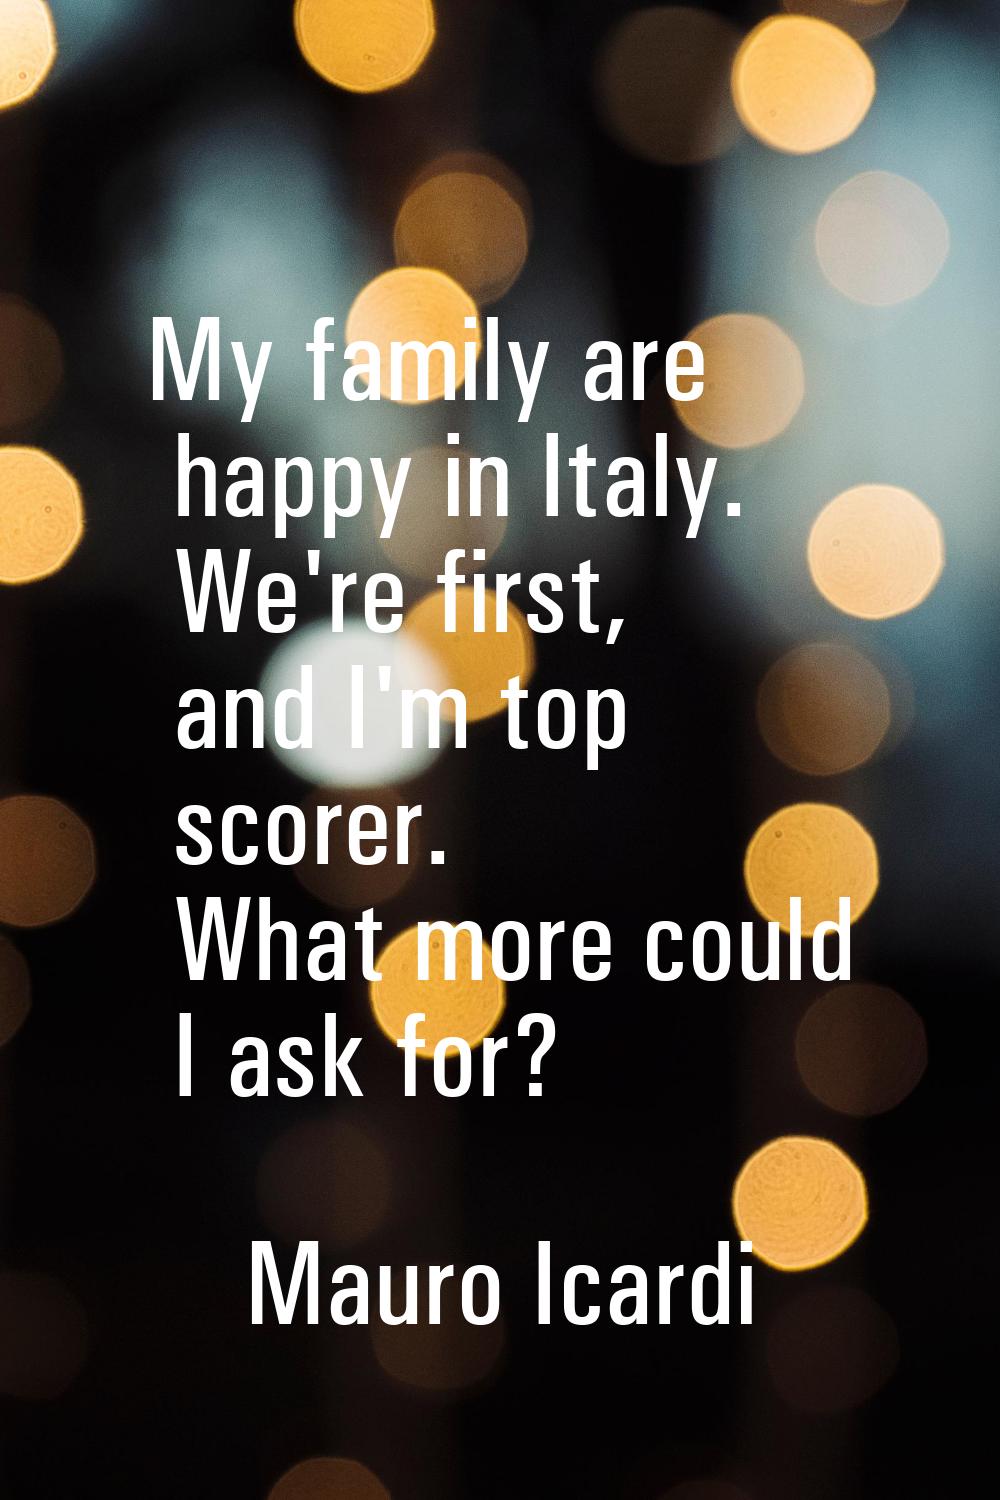 My family are happy in Italy. We're first, and I'm top scorer. What more could I ask for?